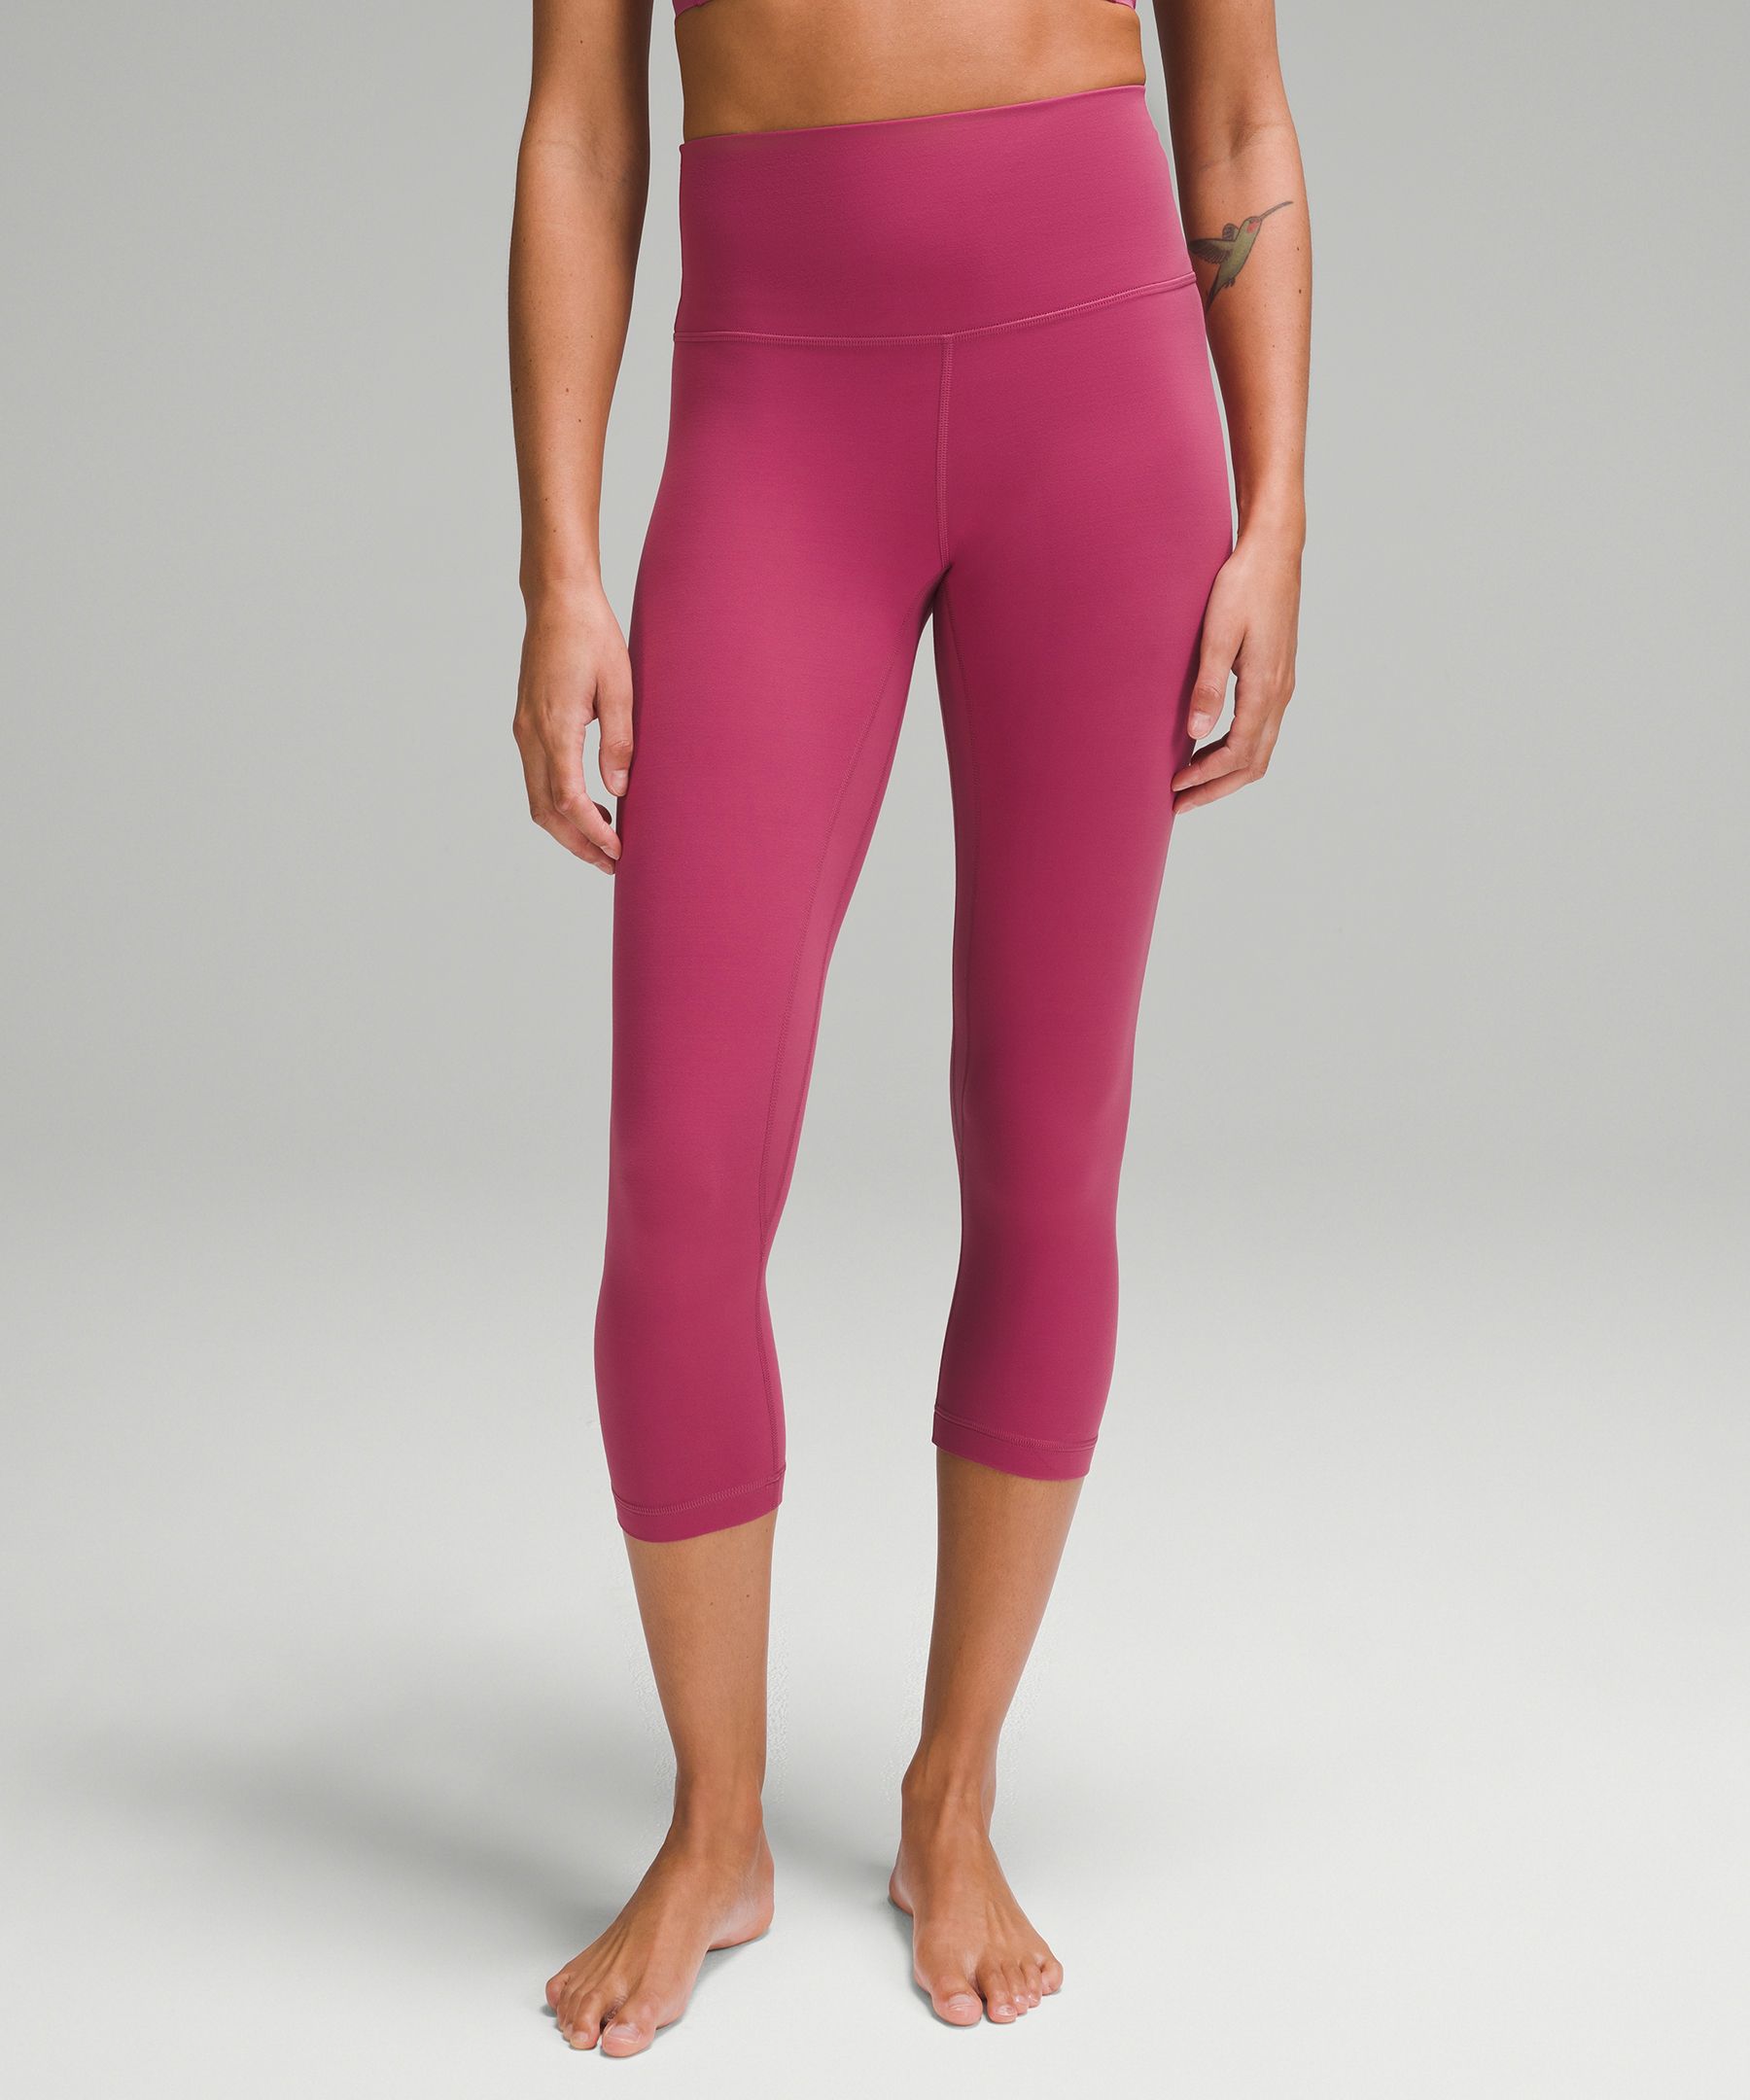 Lululemon Ebb to Train Leggings Tight Abstract Pink Salmon Color